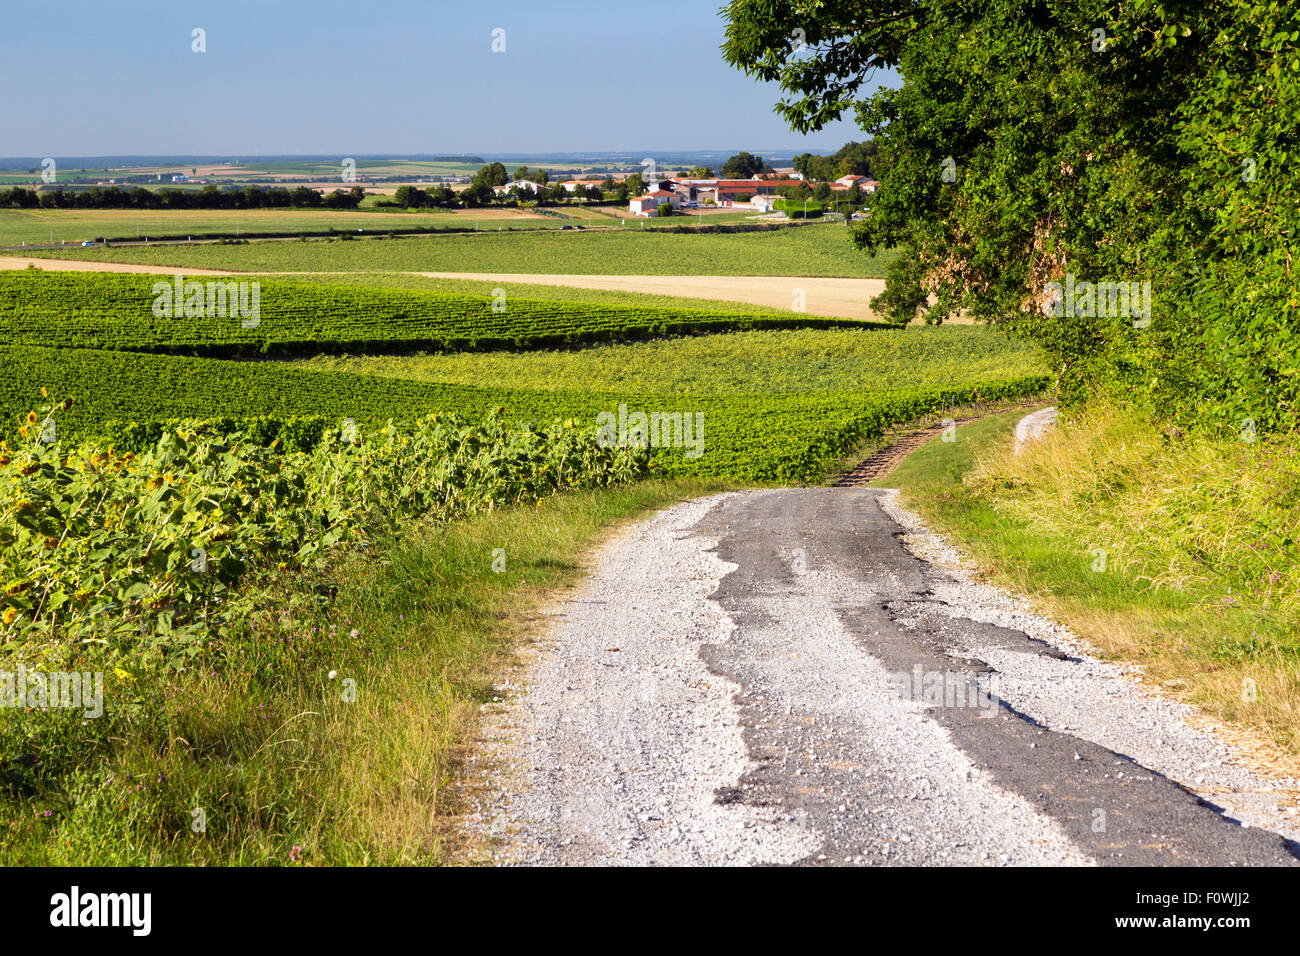 Road through vineyards, Charentes, south west France Stock Photo